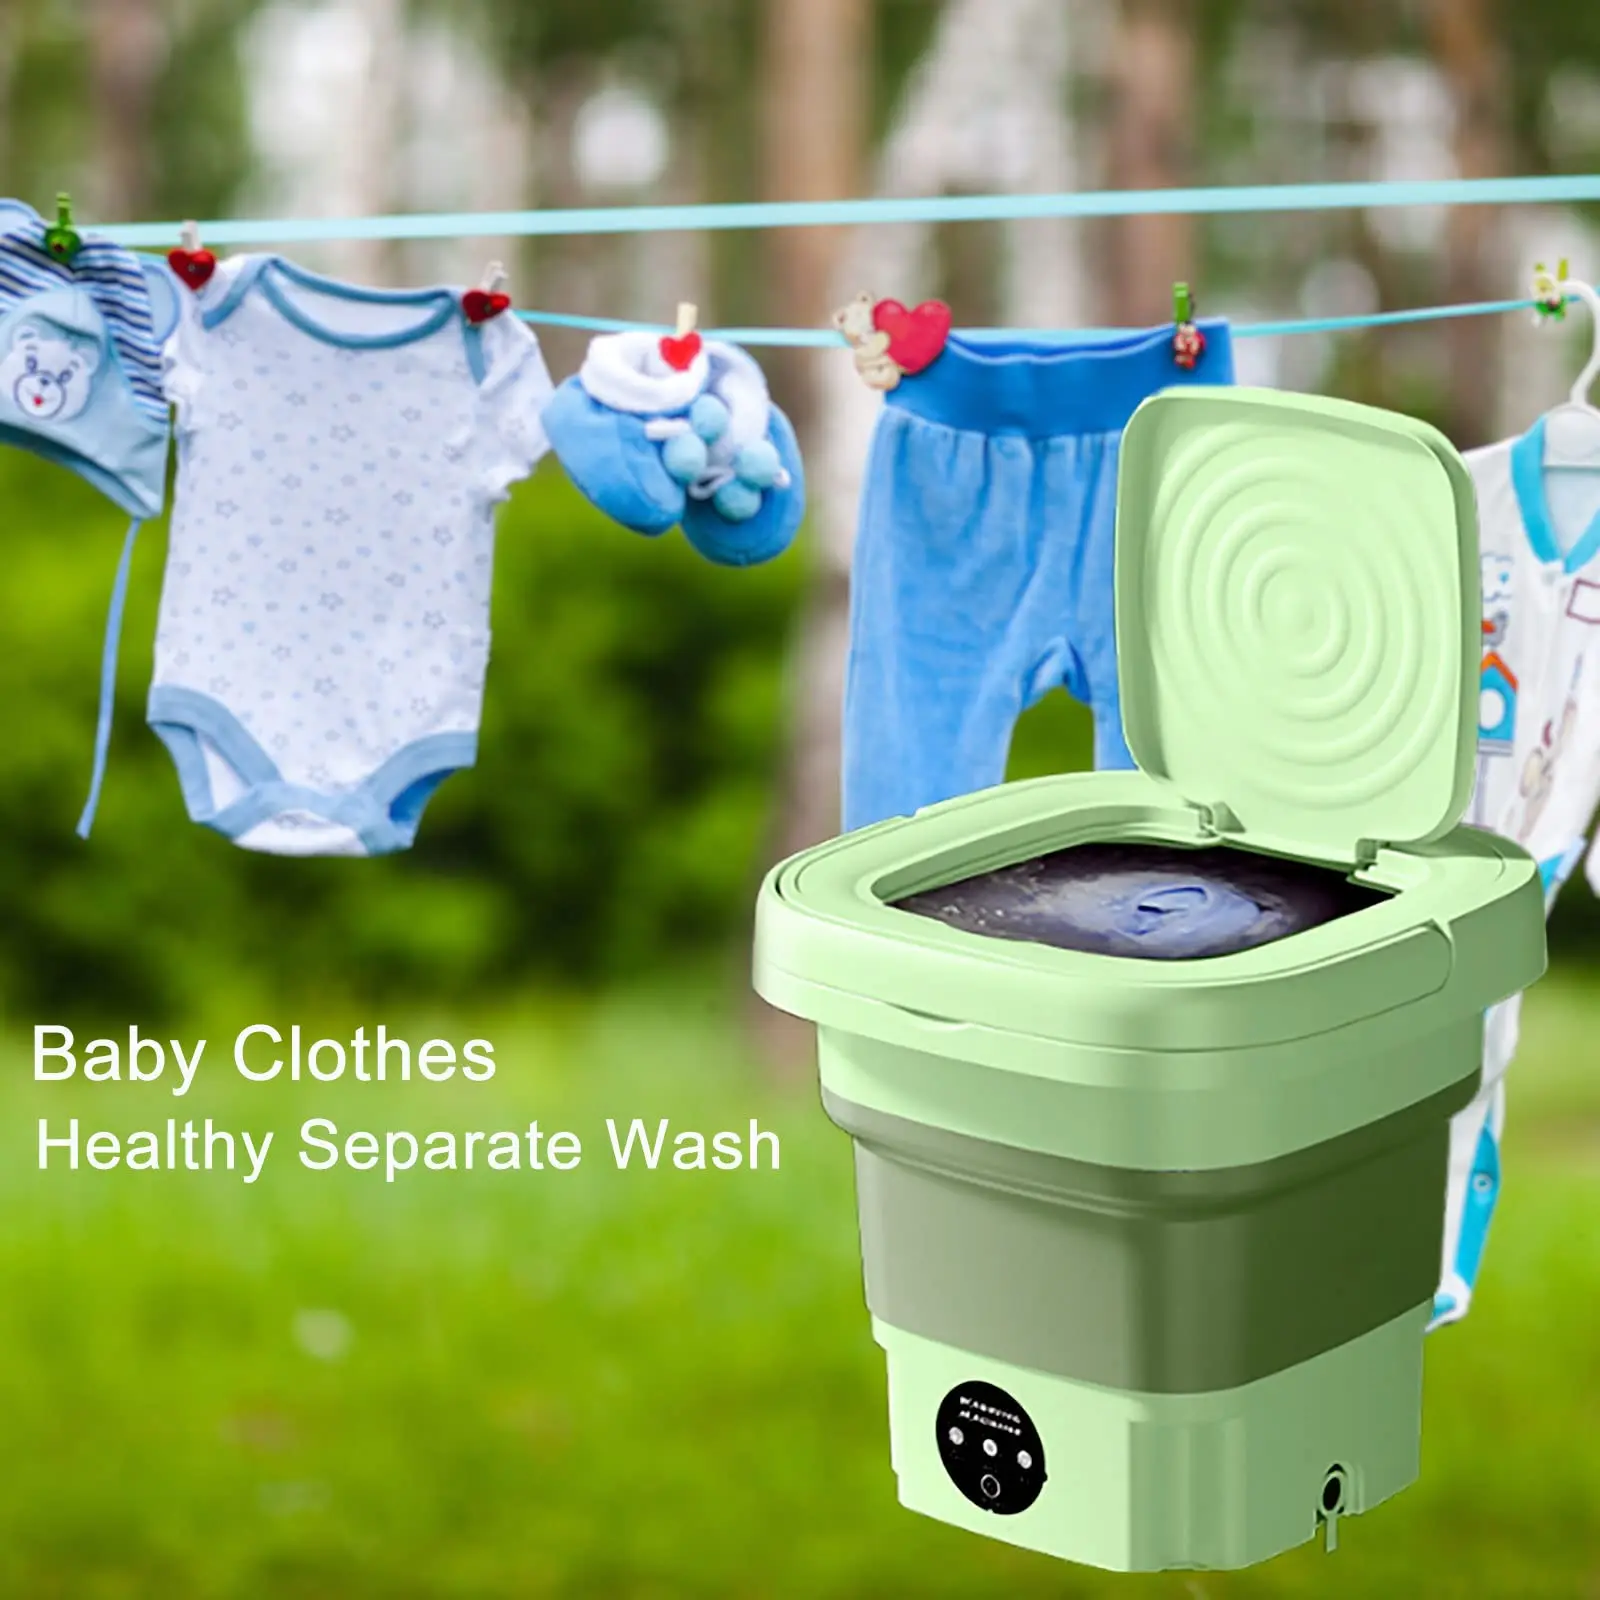  Foldable Washing Machine,High Capacity Mini Washer with 3 Modes  Deep Cleaning Half Automatic Washt,Portable Washing Machine with Soft Spin  Dry for Socks,Baby Clothes,Towels,Delicate Items(Green (with hanger)) :  Appliances